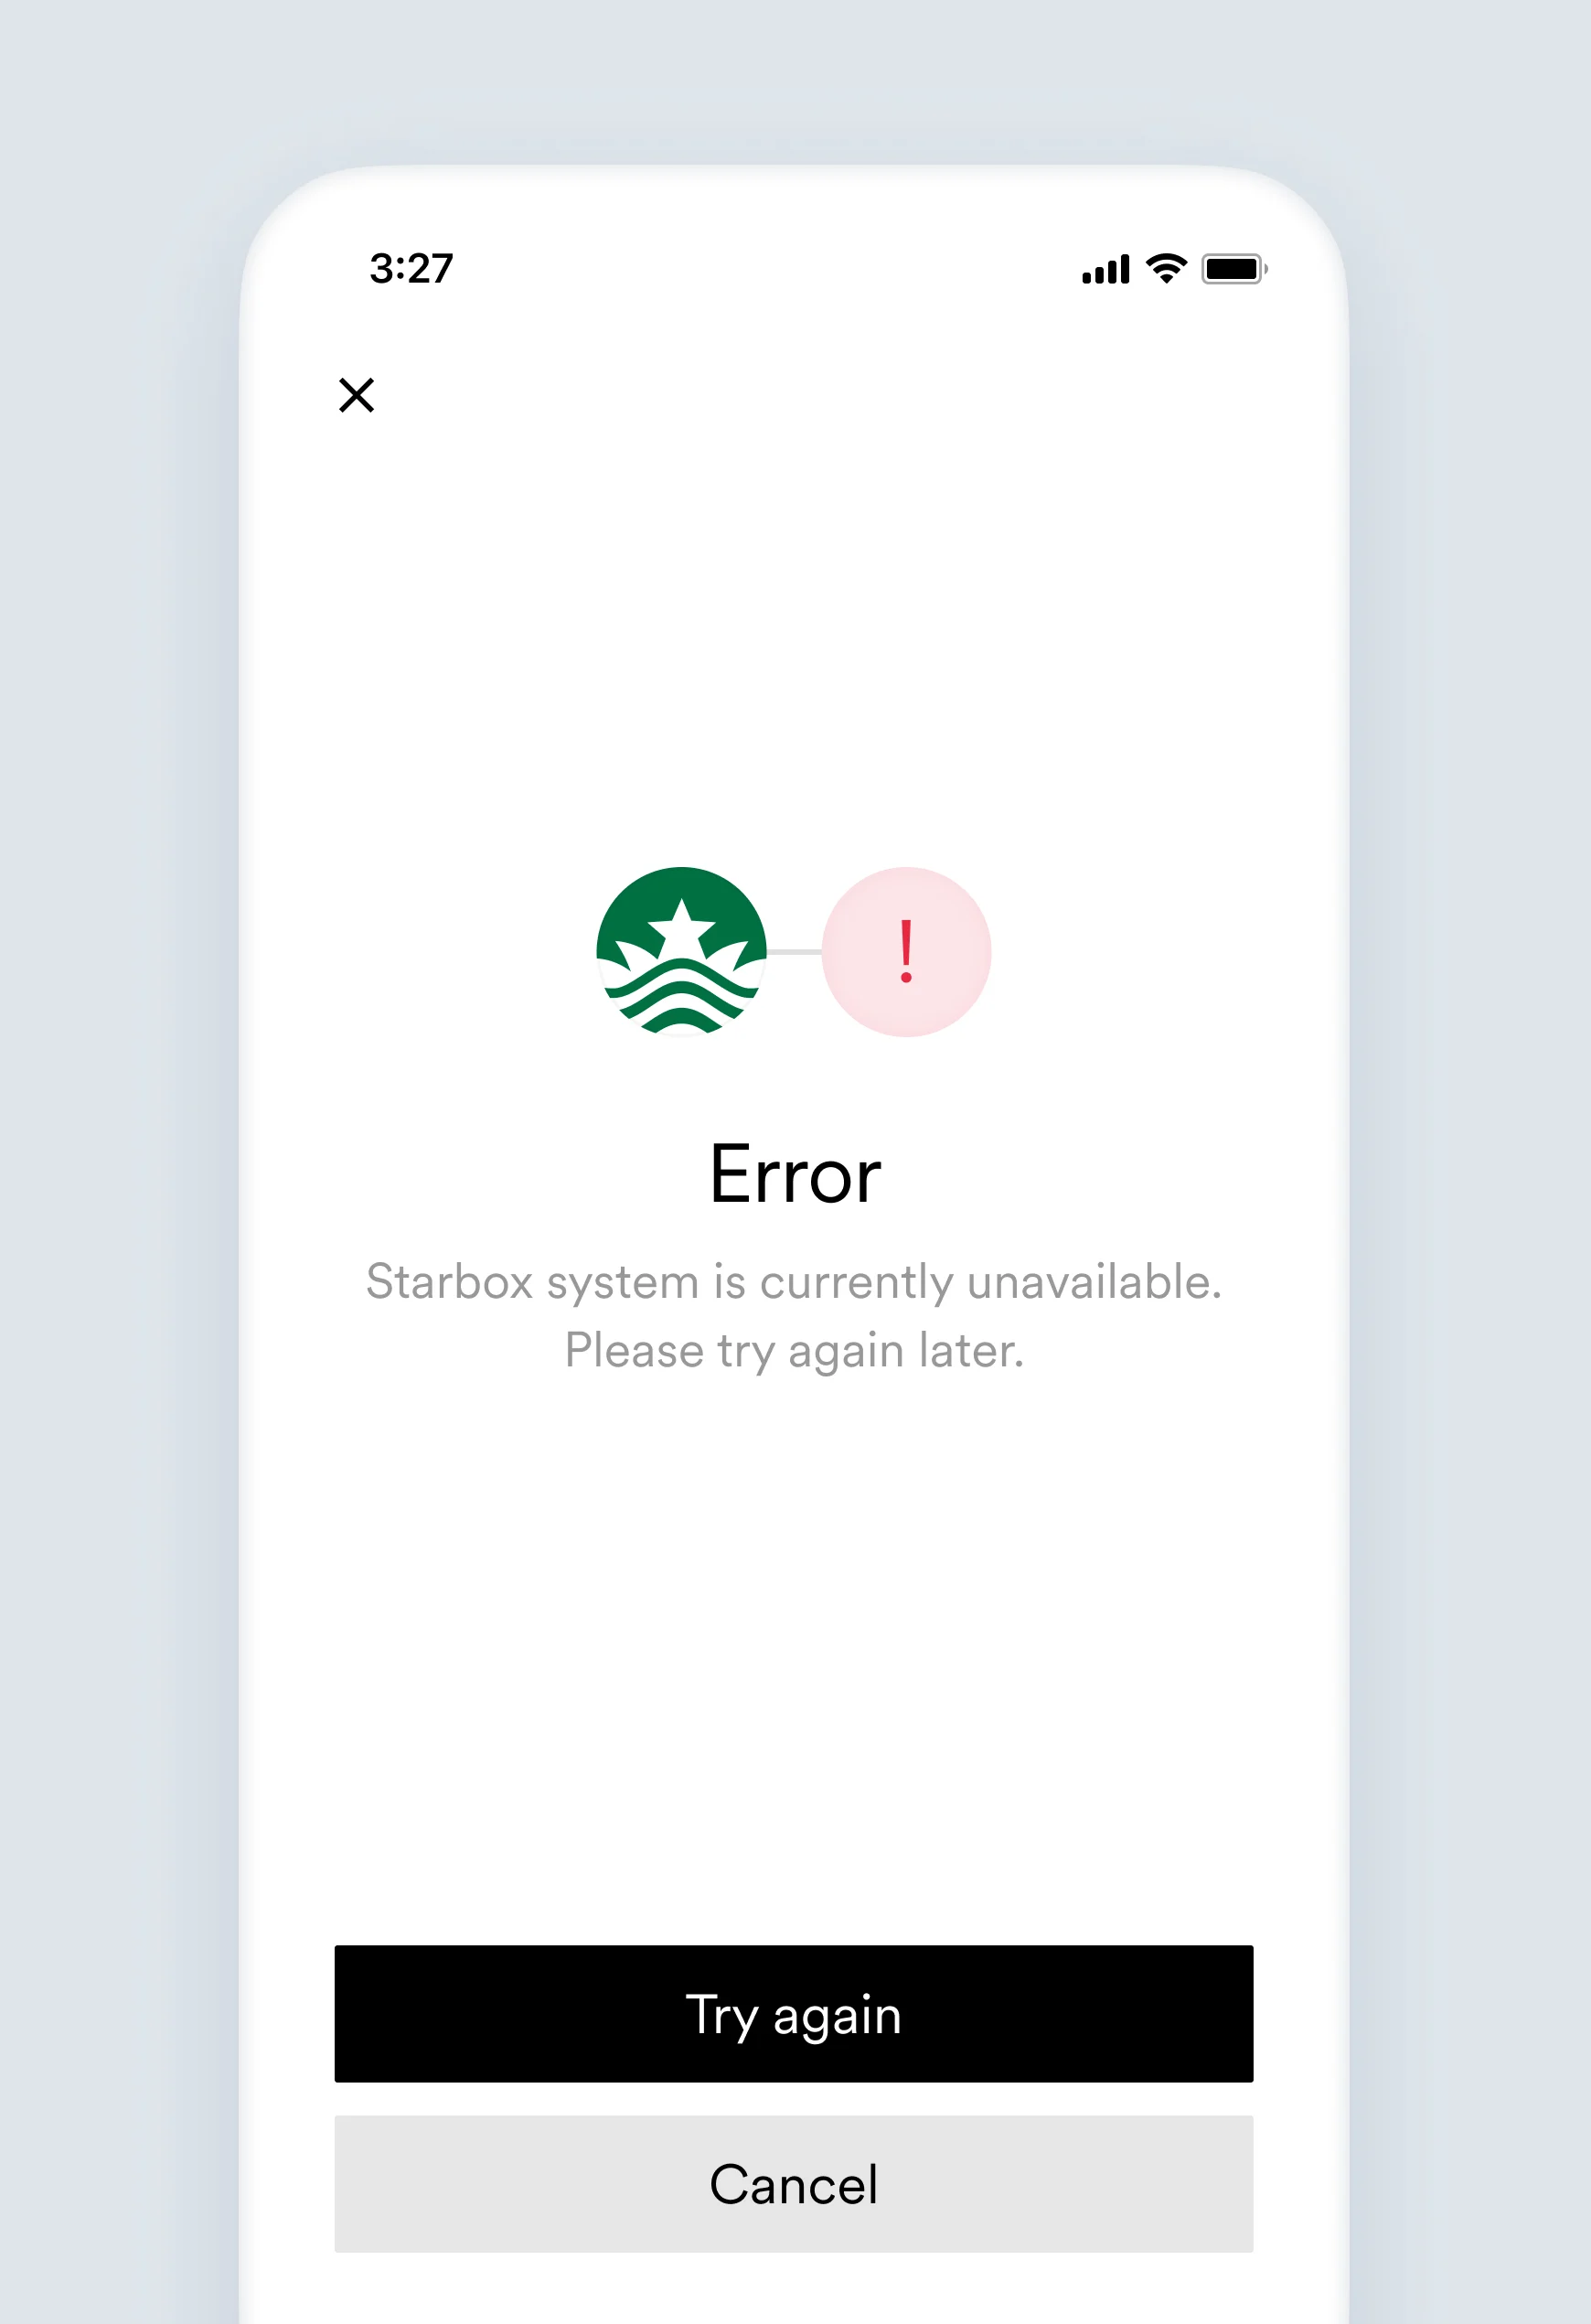 The service_unavailable account connection error screen.